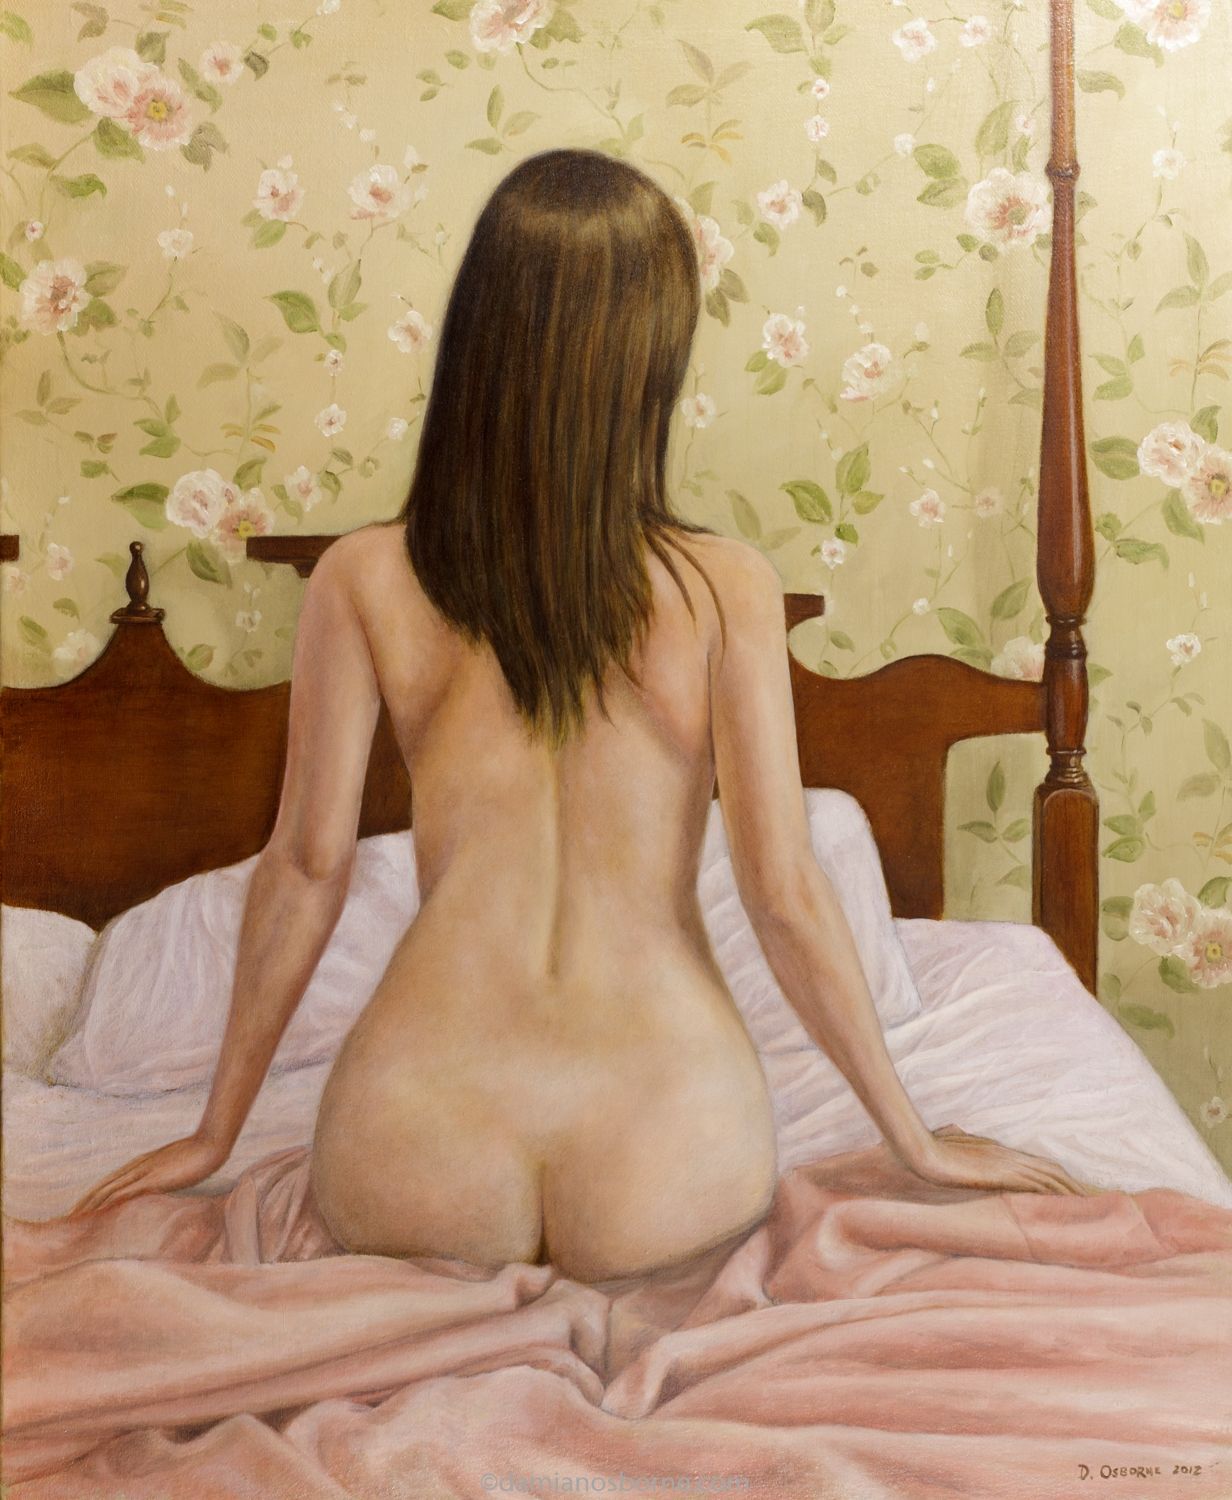 Nude with Floral Wall Paper, figurative oil painting by Damian Osborne, oil on canvas, 50 x 42 cm, 2012